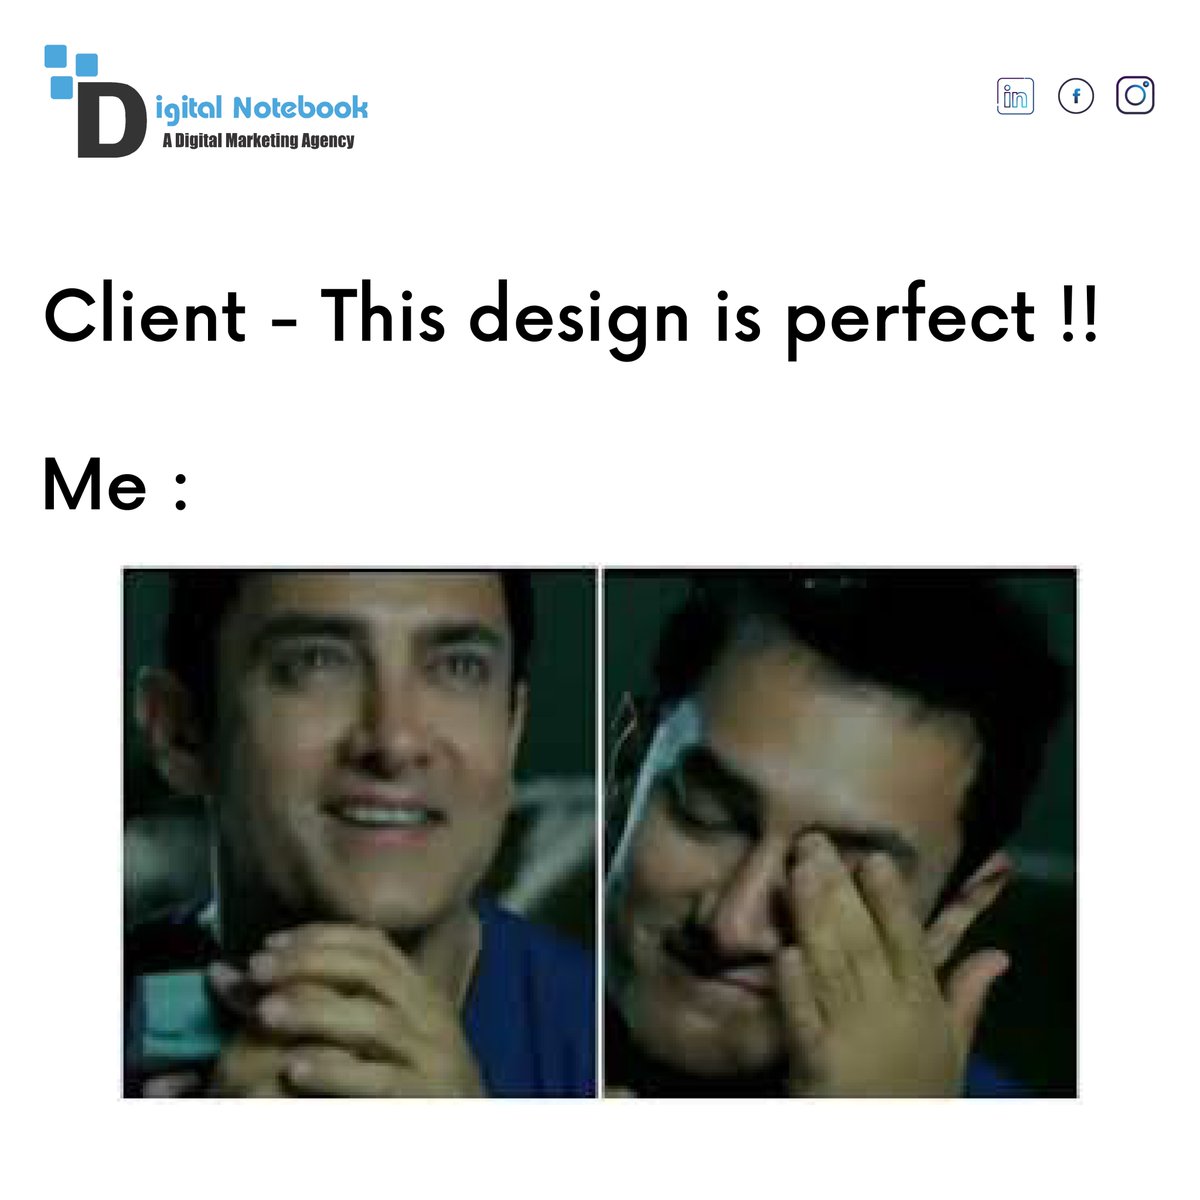 Capturing the essence of a rare moment  
. 
. 
digitalnotebook.in
. 
. 
#digitalnotebook #digitalmarketingagency #digitalmarketingmeme #marketingmemes #digitalmarketingmemes #digitalmarketing  #marketingmeme